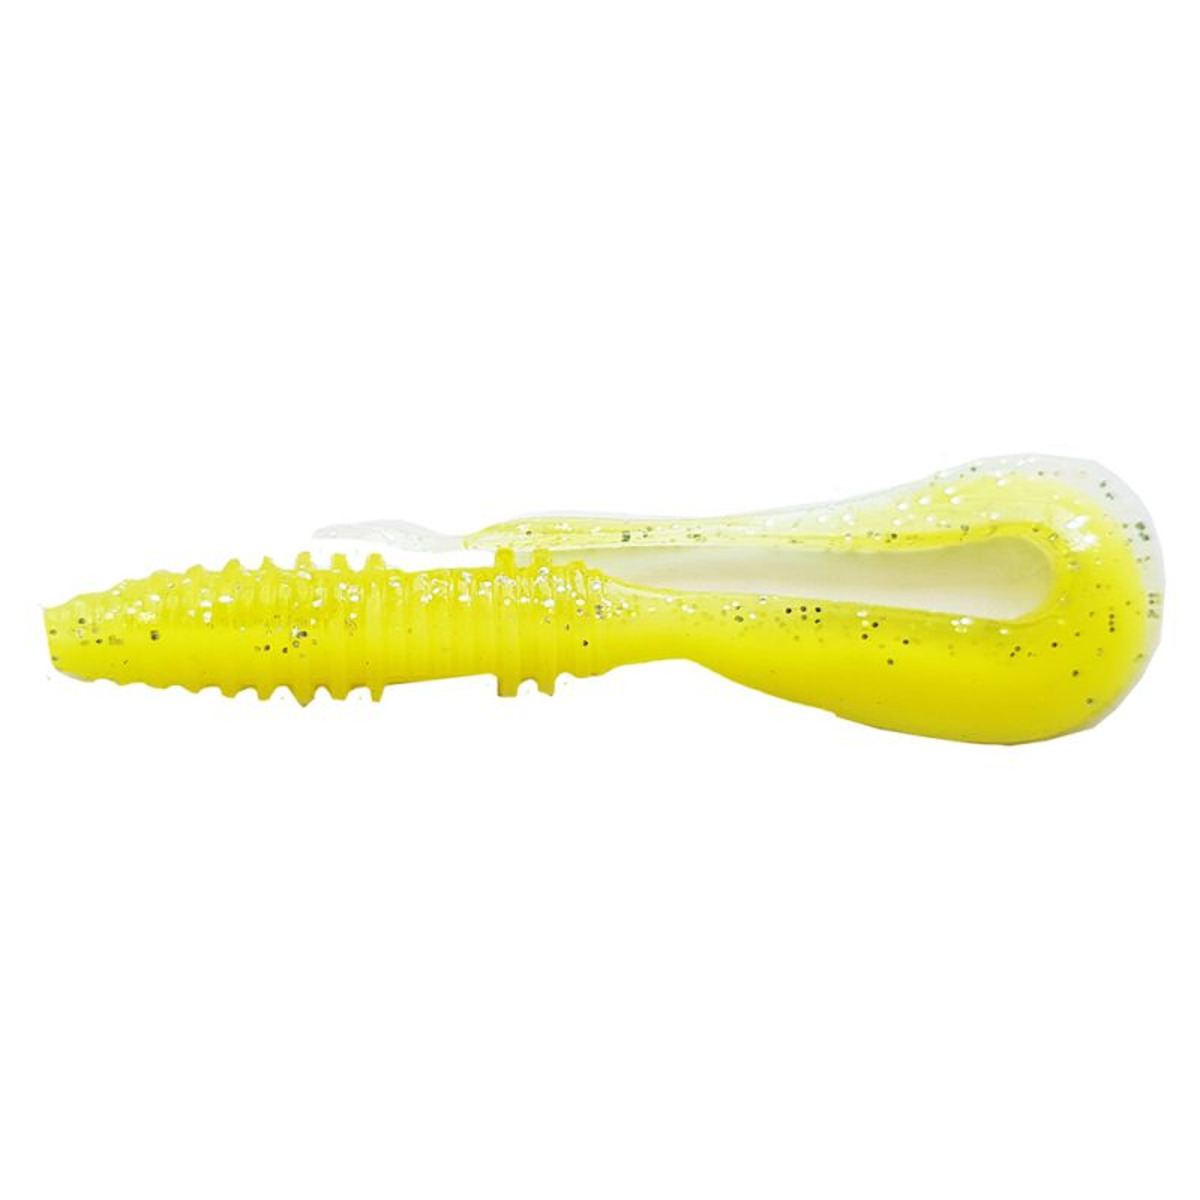 Rapture Mad Worm - 8.0 cm - Chartreuse Ghost